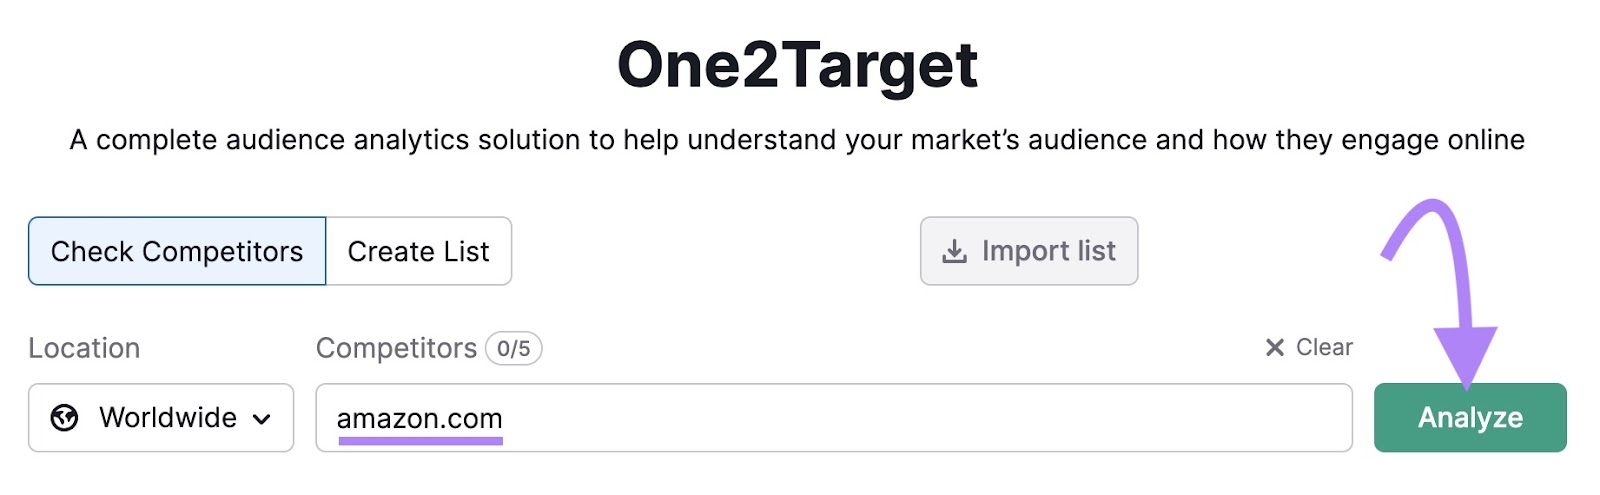 One2Target tool with “amazon.com” in the domain bar.